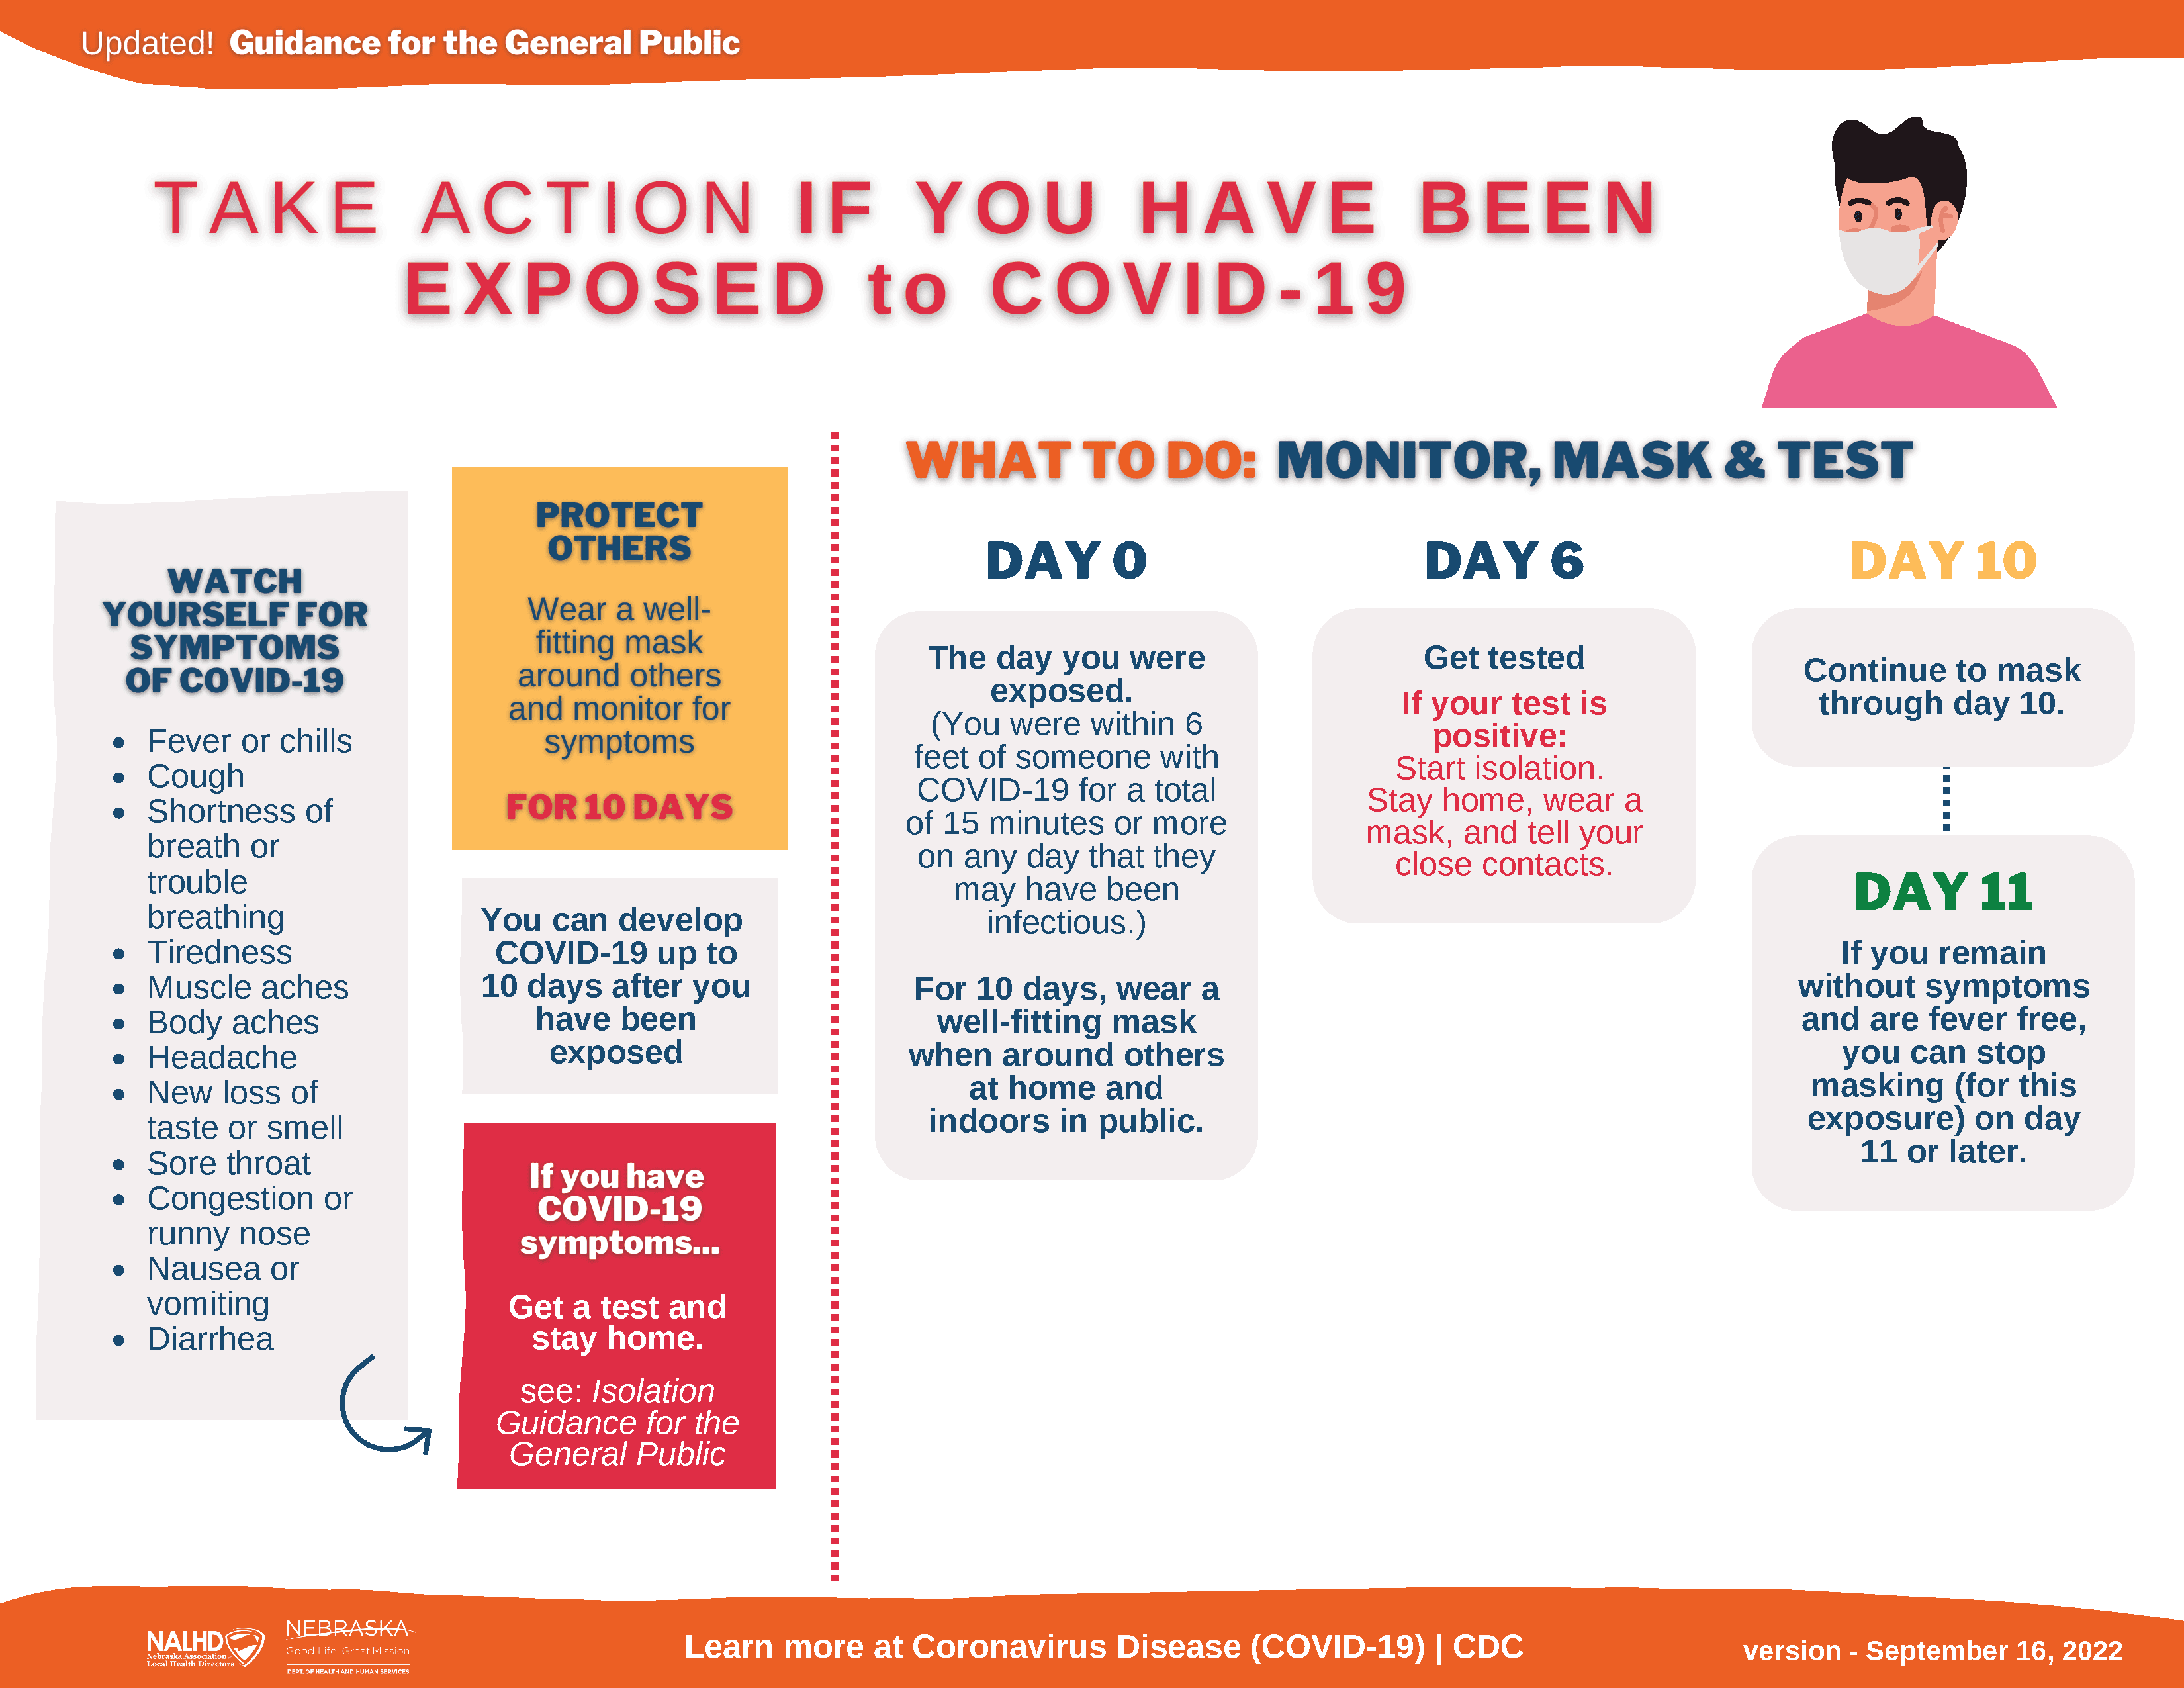 If You Are Exposed to COVID-19